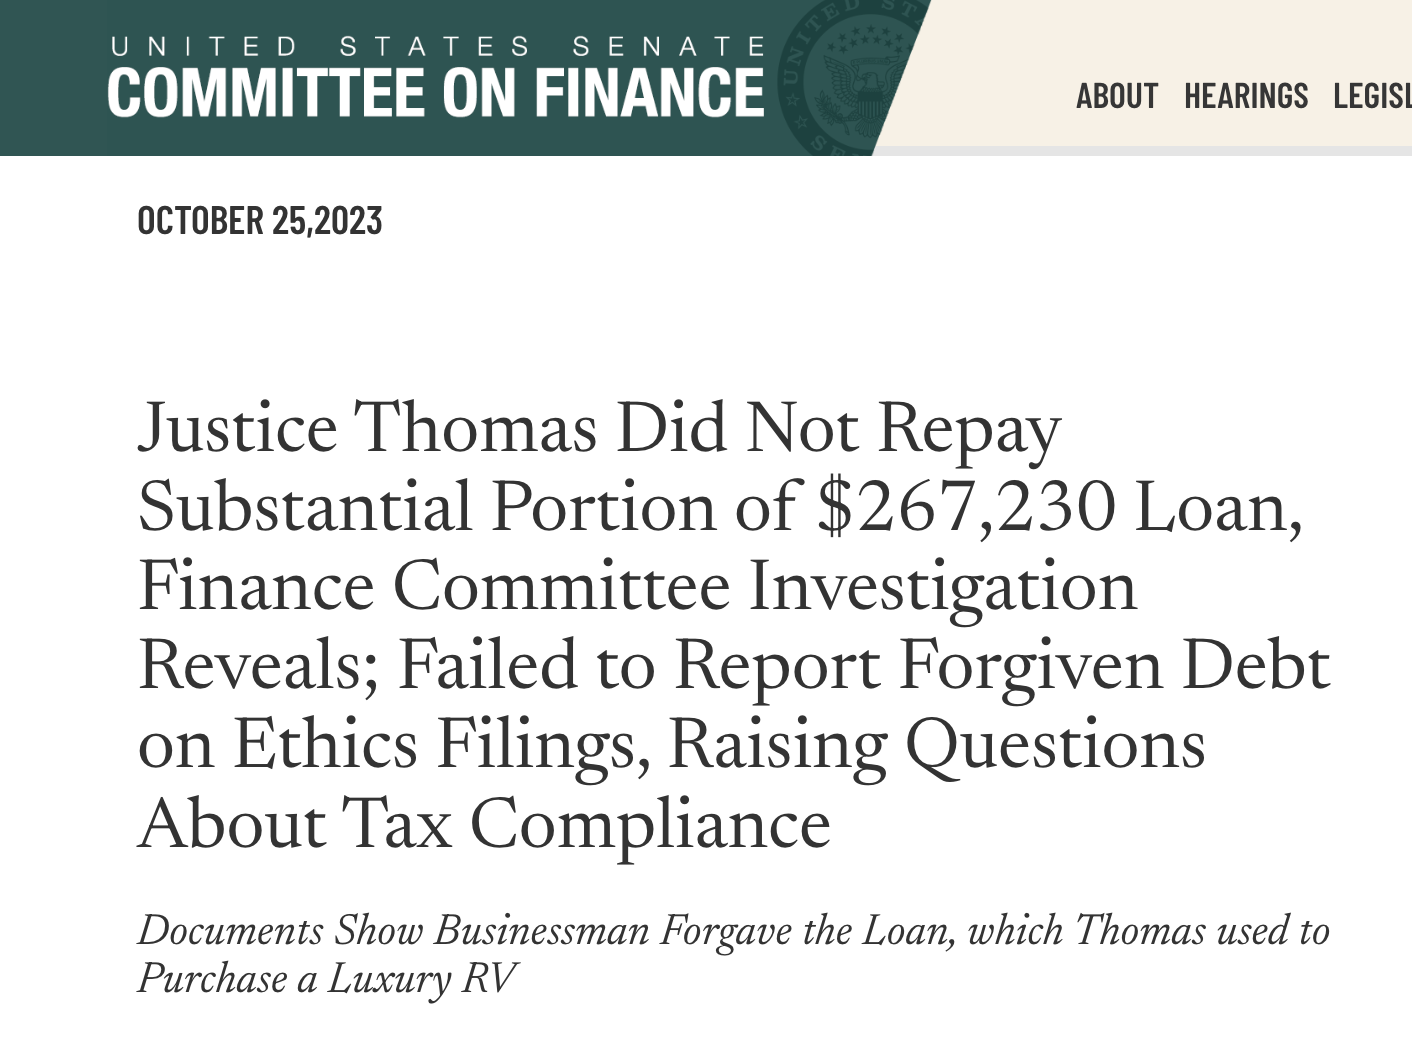 OCTOBER 25,2023 Justice Thomas Did Not Repay Substantial Portion of $267,230 Loan, Finance Committee Investigation Reveals; Failed to Report Forgiven Debt on Ethics Filings, Raising Questions About Tax Compliance Documents Show Businessman Forgave the Loan, which Thomas used to Purchase a Luxury RV